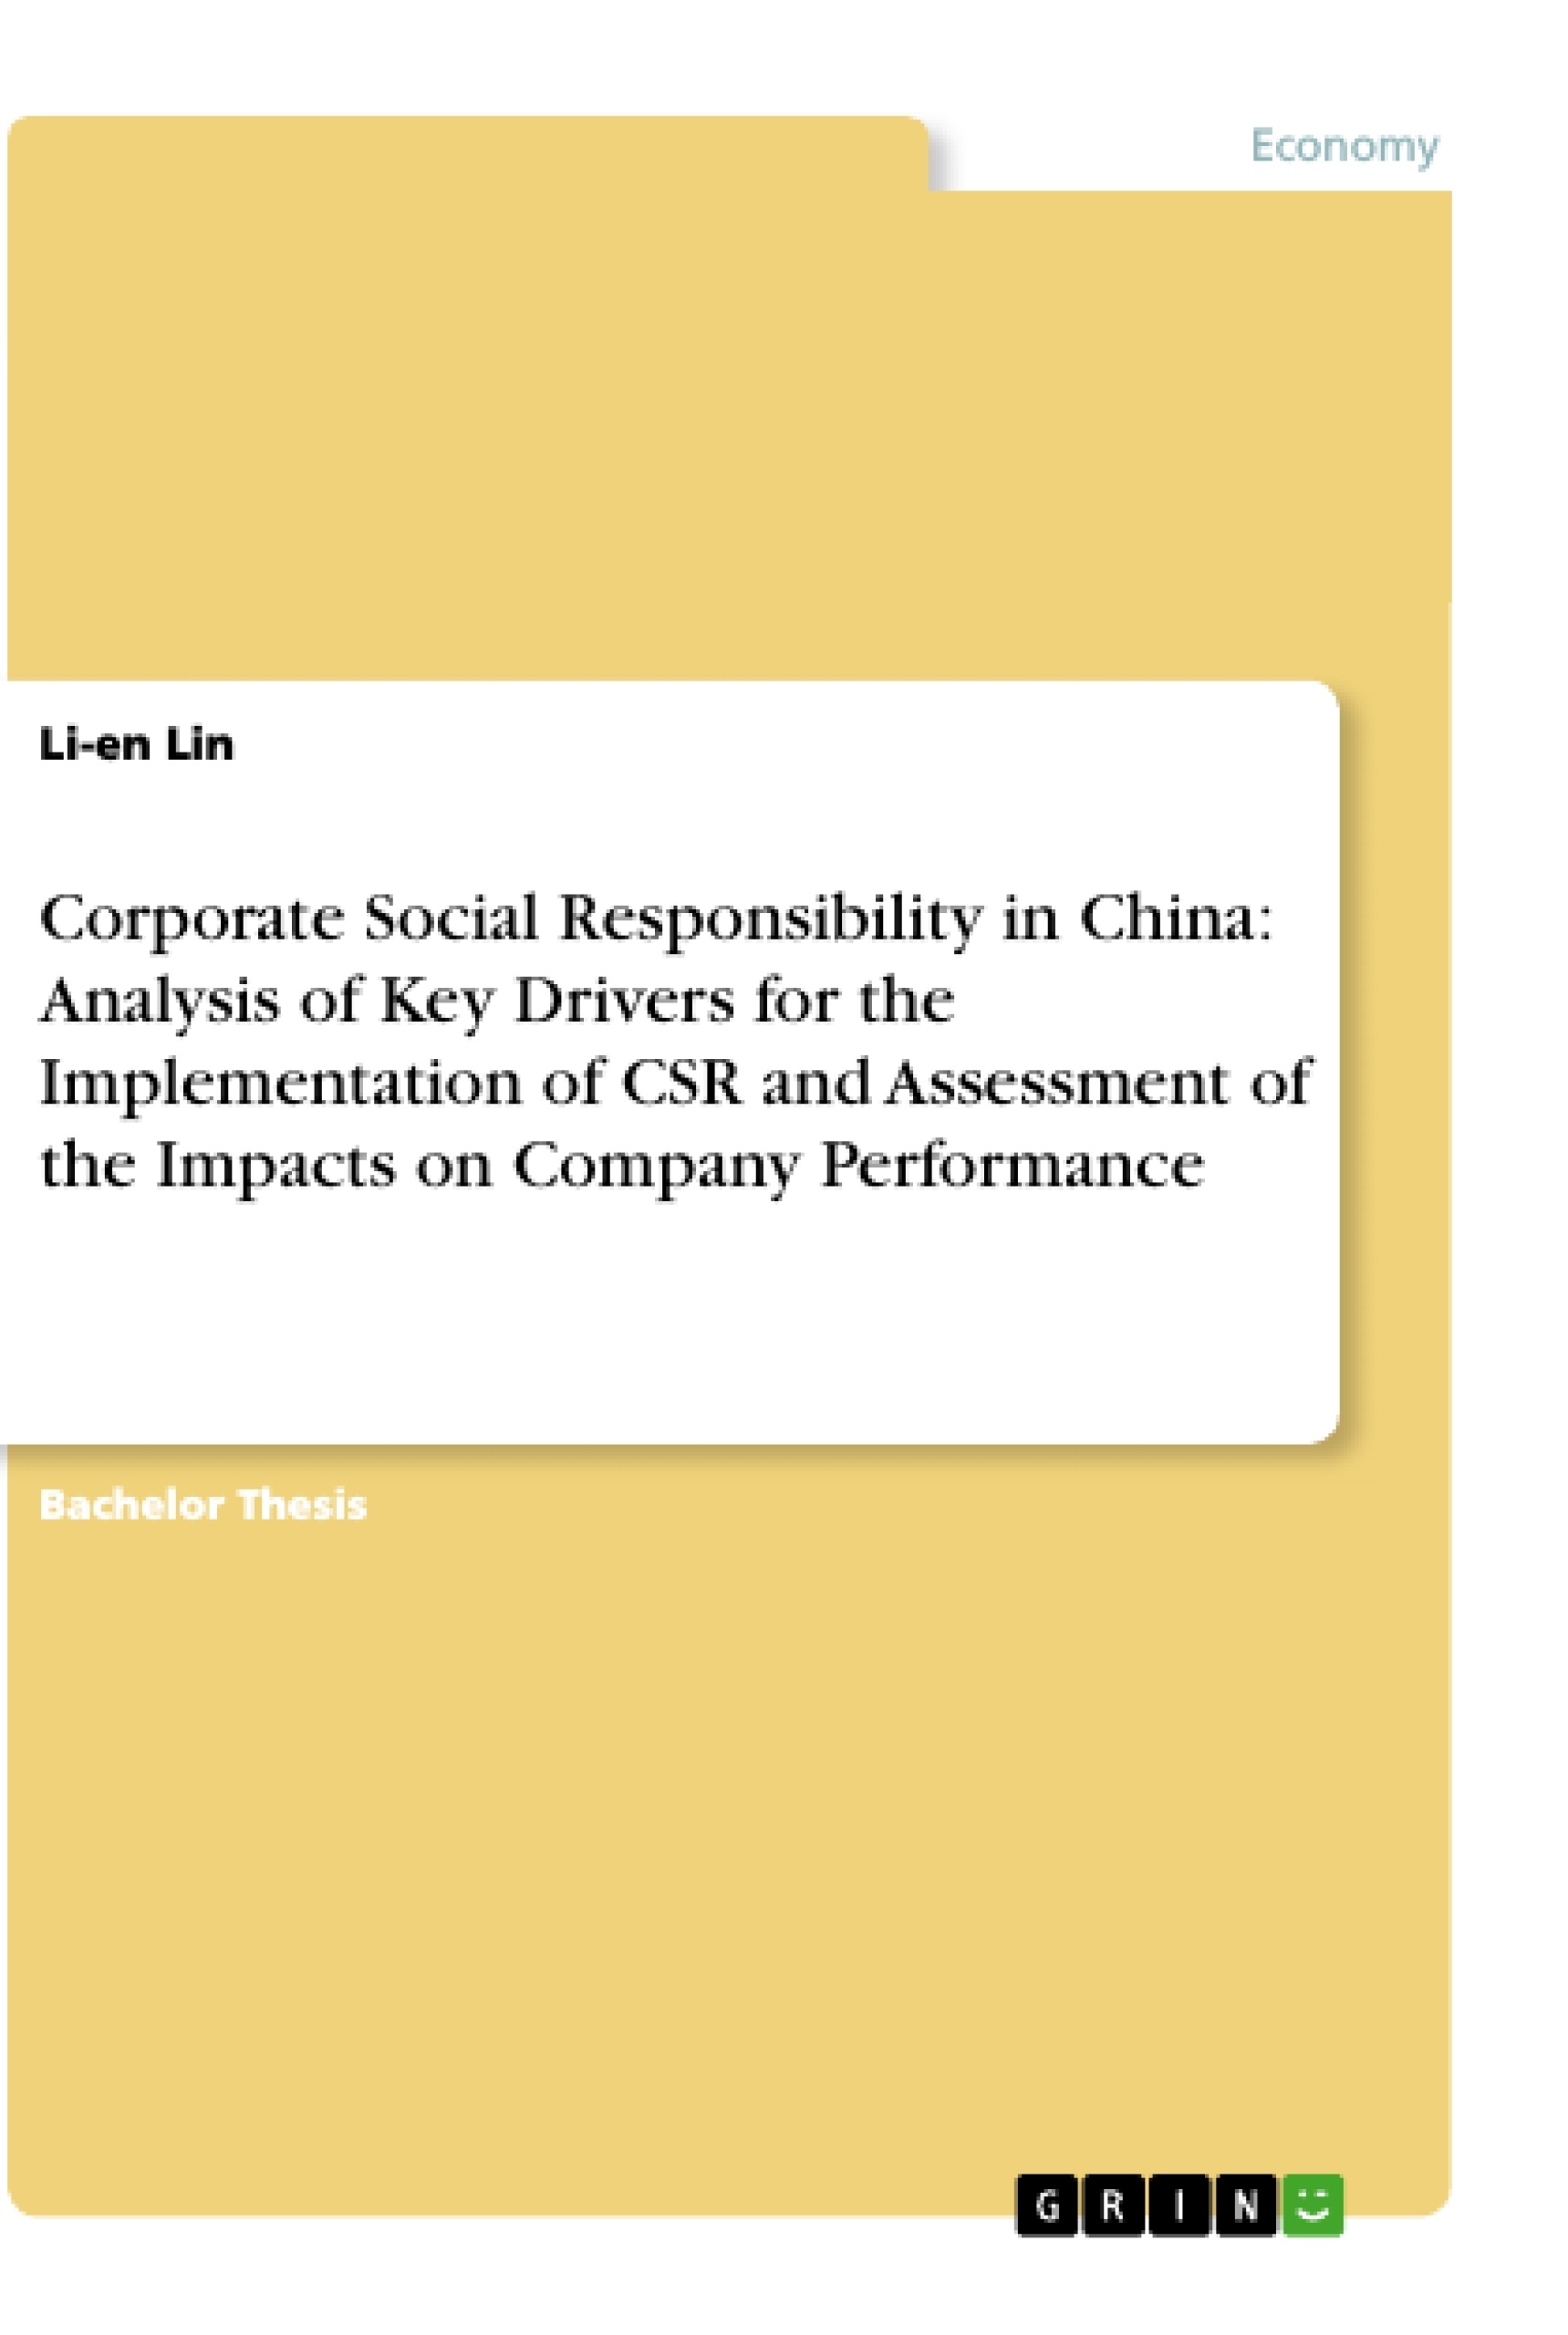 Title: Corporate Social Responsibility in China: Analysis of Key Drivers for the Implementation of CSR and Assessment of the Impacts on Company Performance